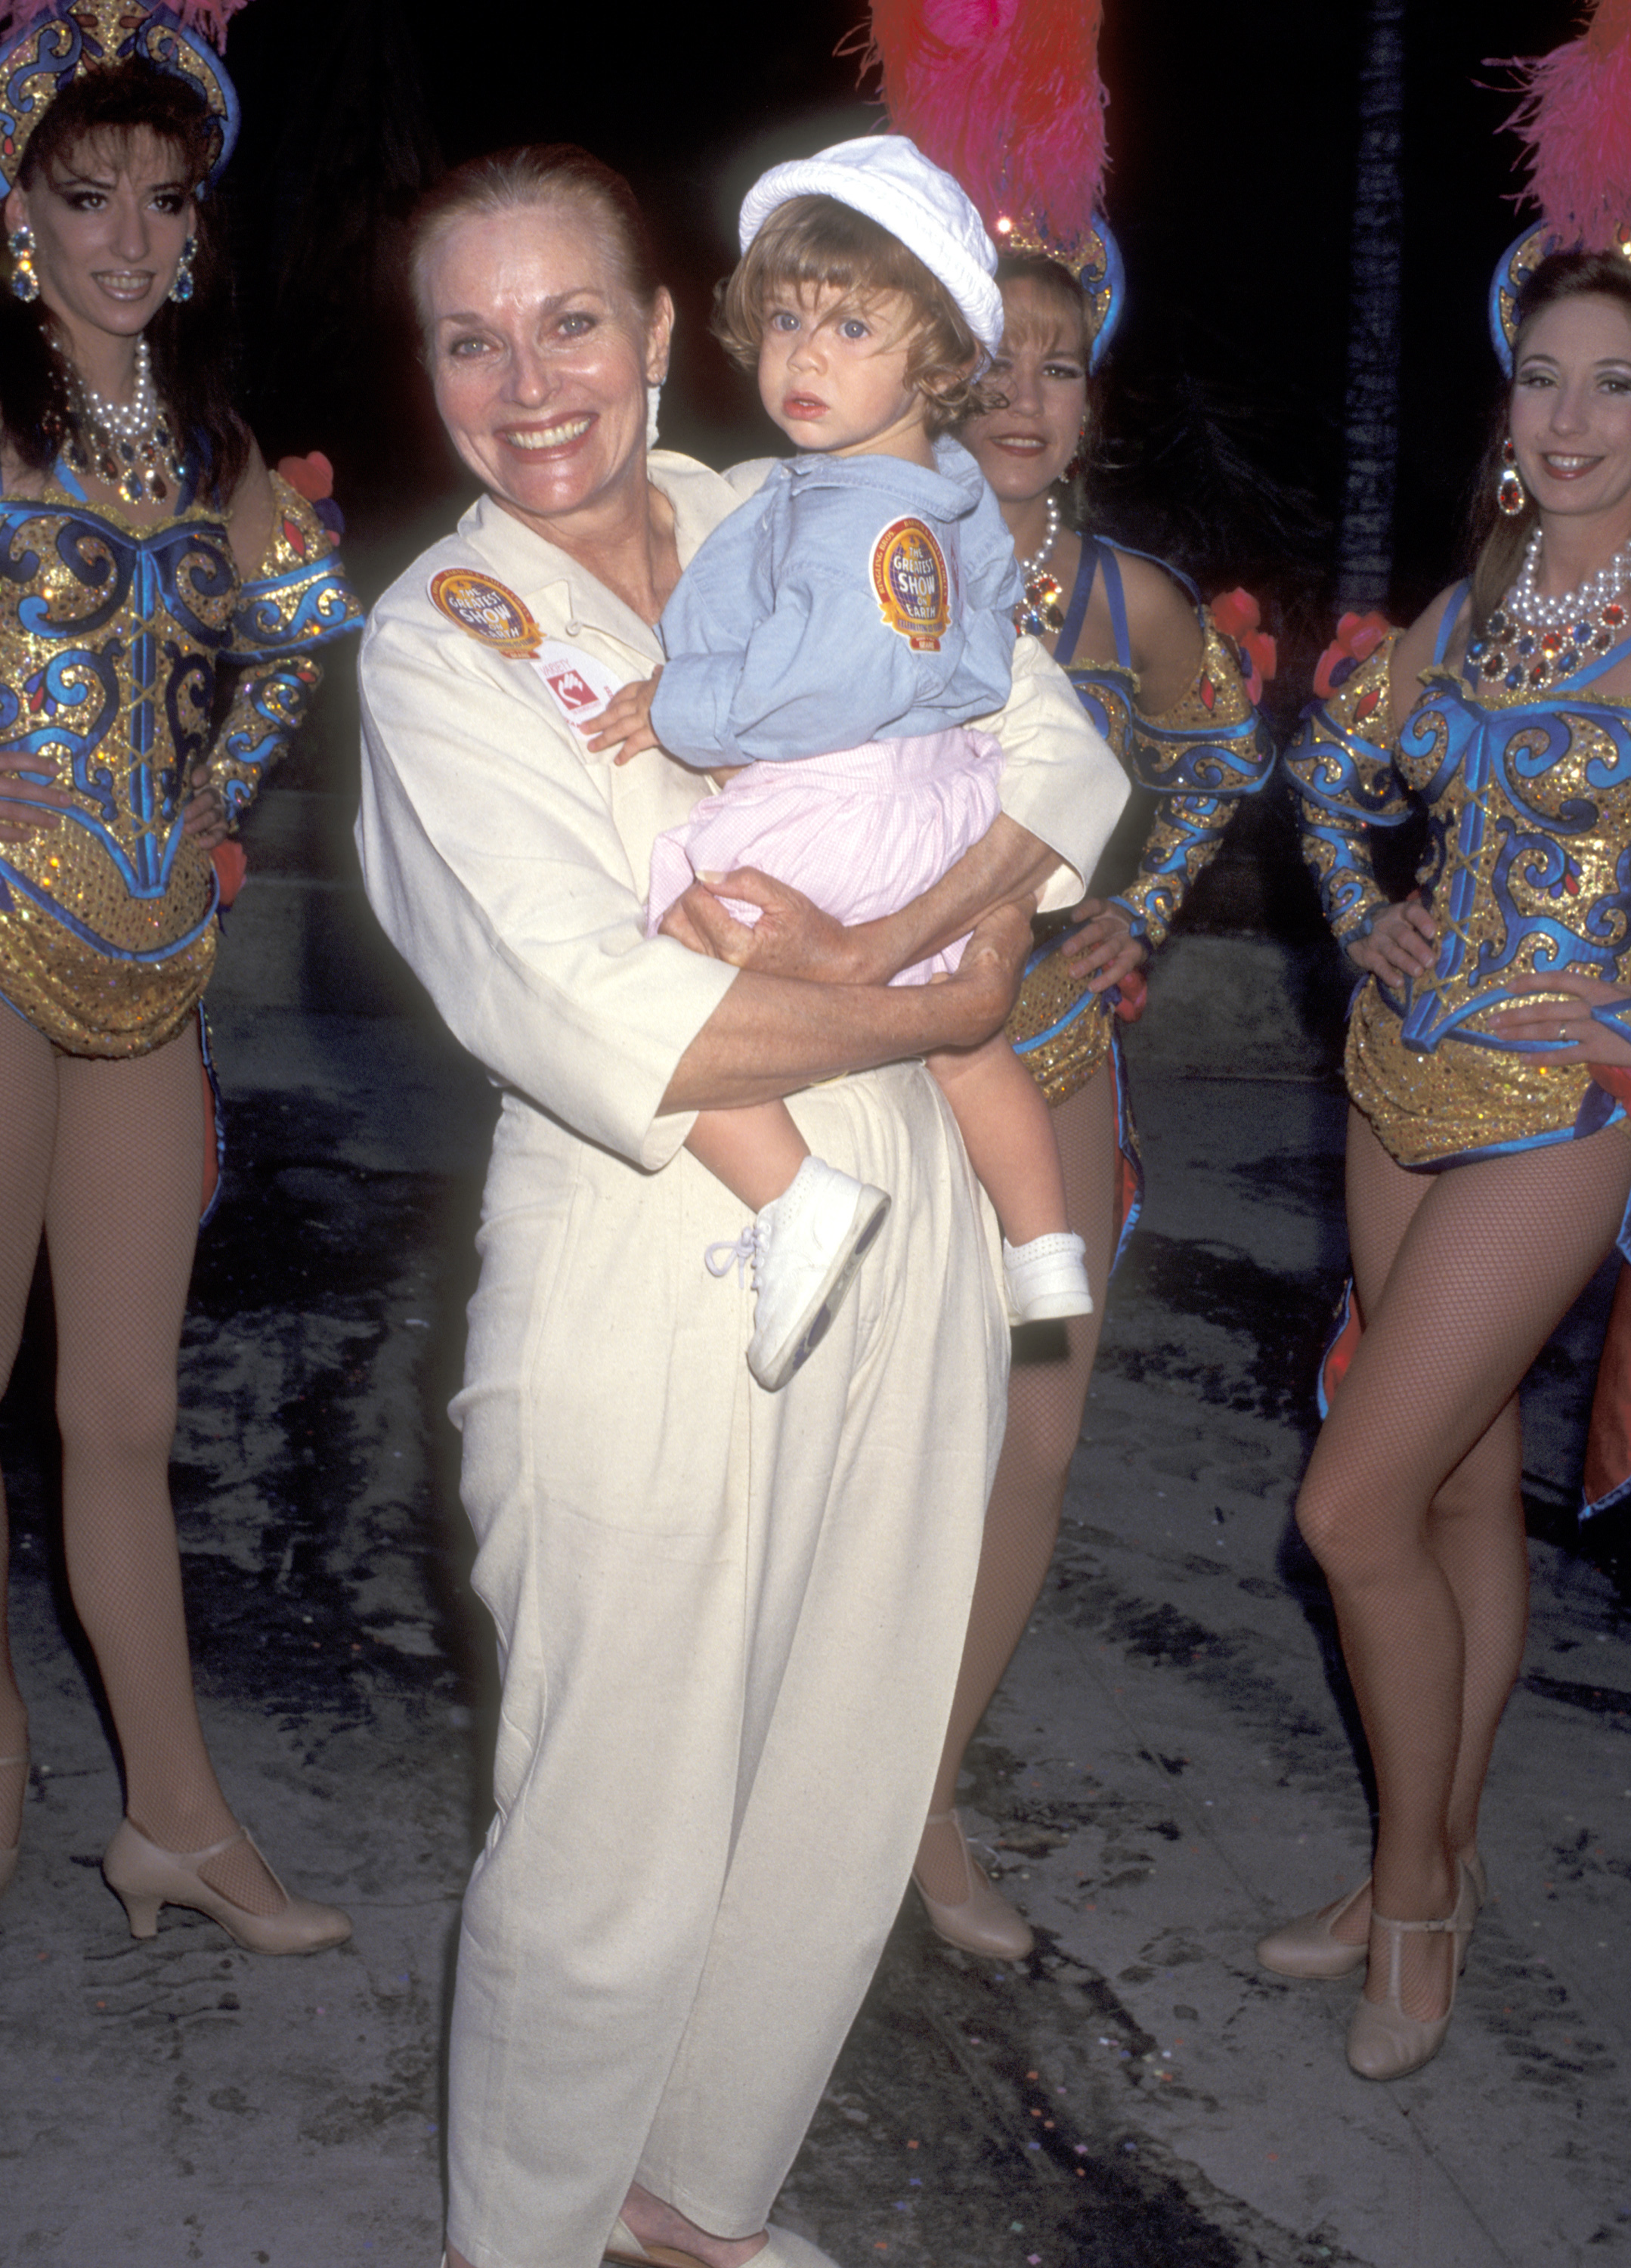 Actress Lee Meriwether and granddaughter Ryan Isabelle at the opening night performance of the Ringling Bros. and Barnum & Bailey Circus to benefit the Variety Club on April 27, 1995, at Los Angeles Sports Arena in Los Angeles, California. | Source: Getty Images